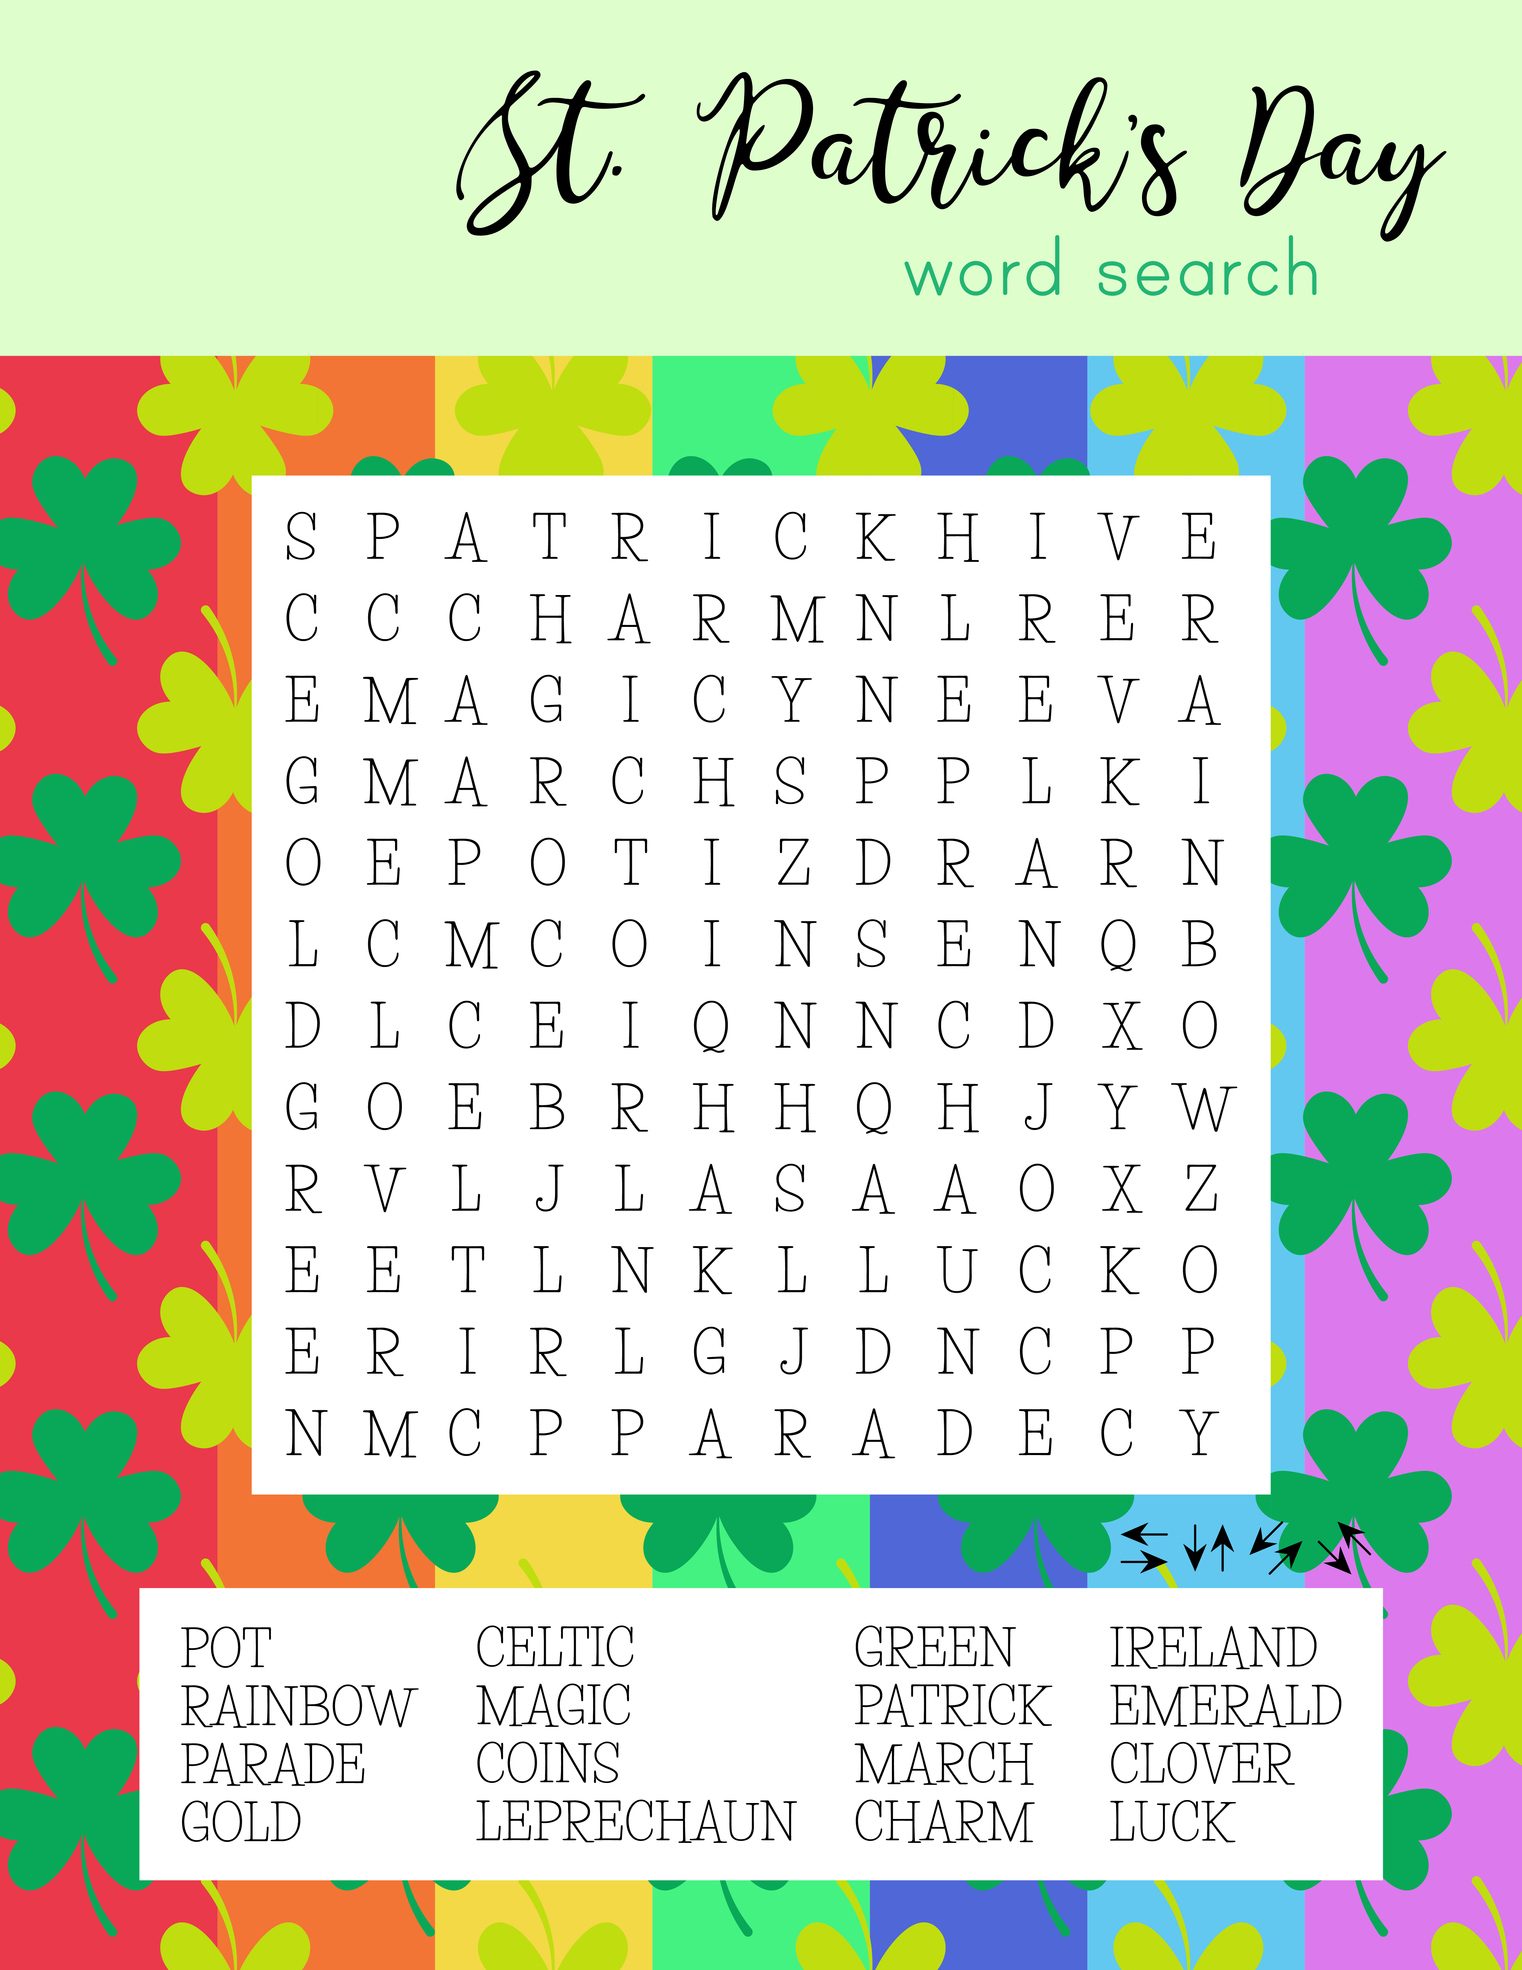 free-st-patrick-s-day-word-search-printable-answers-included